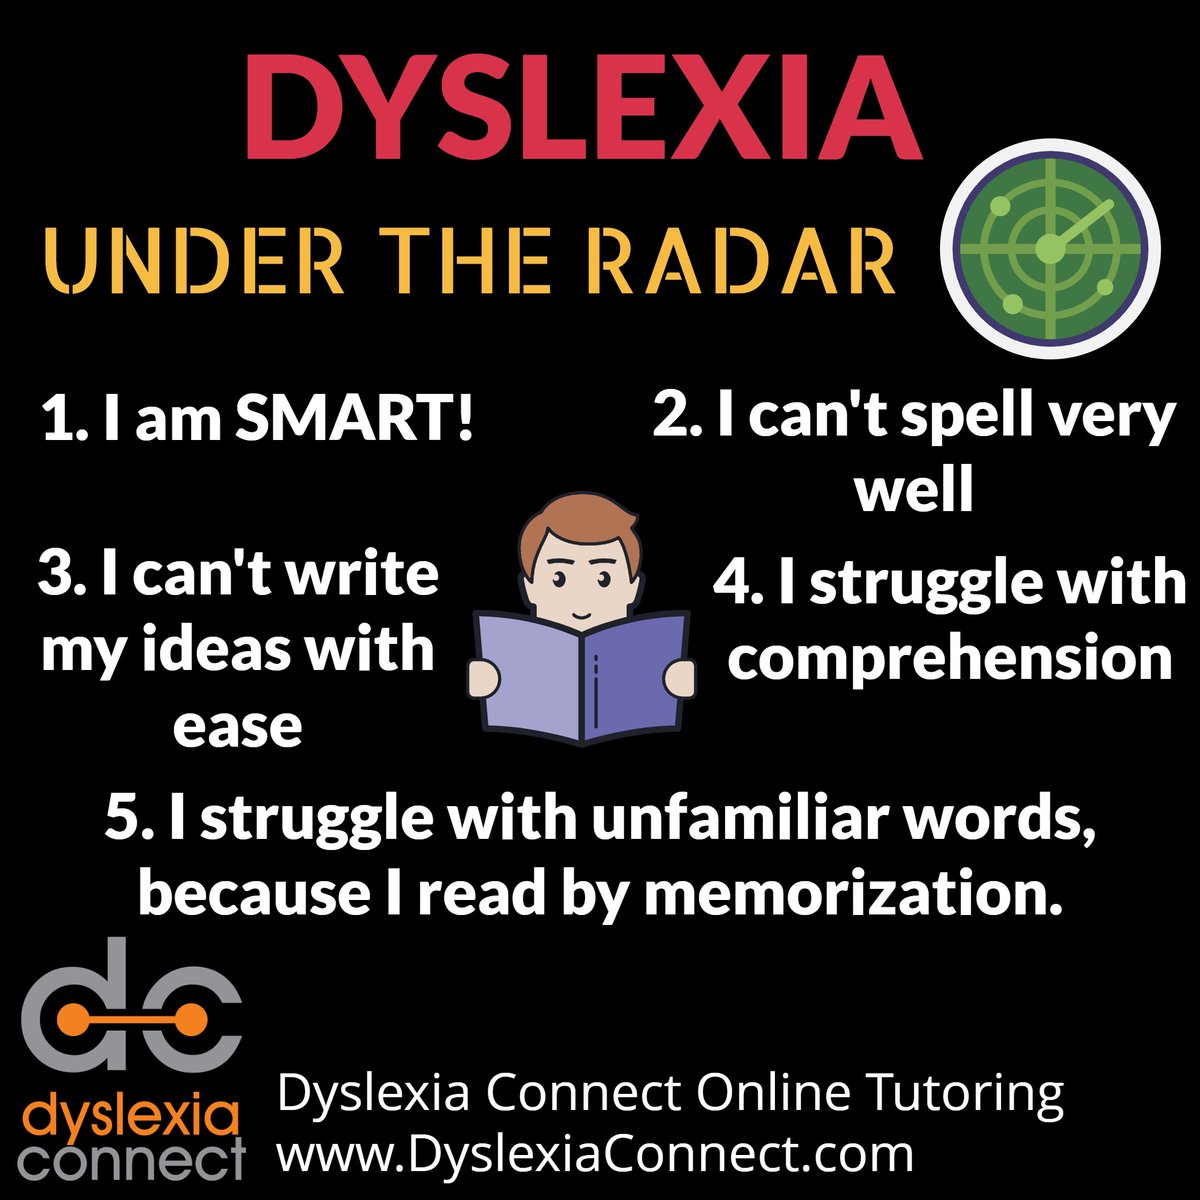 Intelligent students with mild or moderate dyslexia sometimes fly under the radar! in school, they may not be identified as having dyslexia, due to the fact they don't seem to be 'struggling enough'. We need to identify and support these students! #Dyslexia #ADHD #Dysgraphia